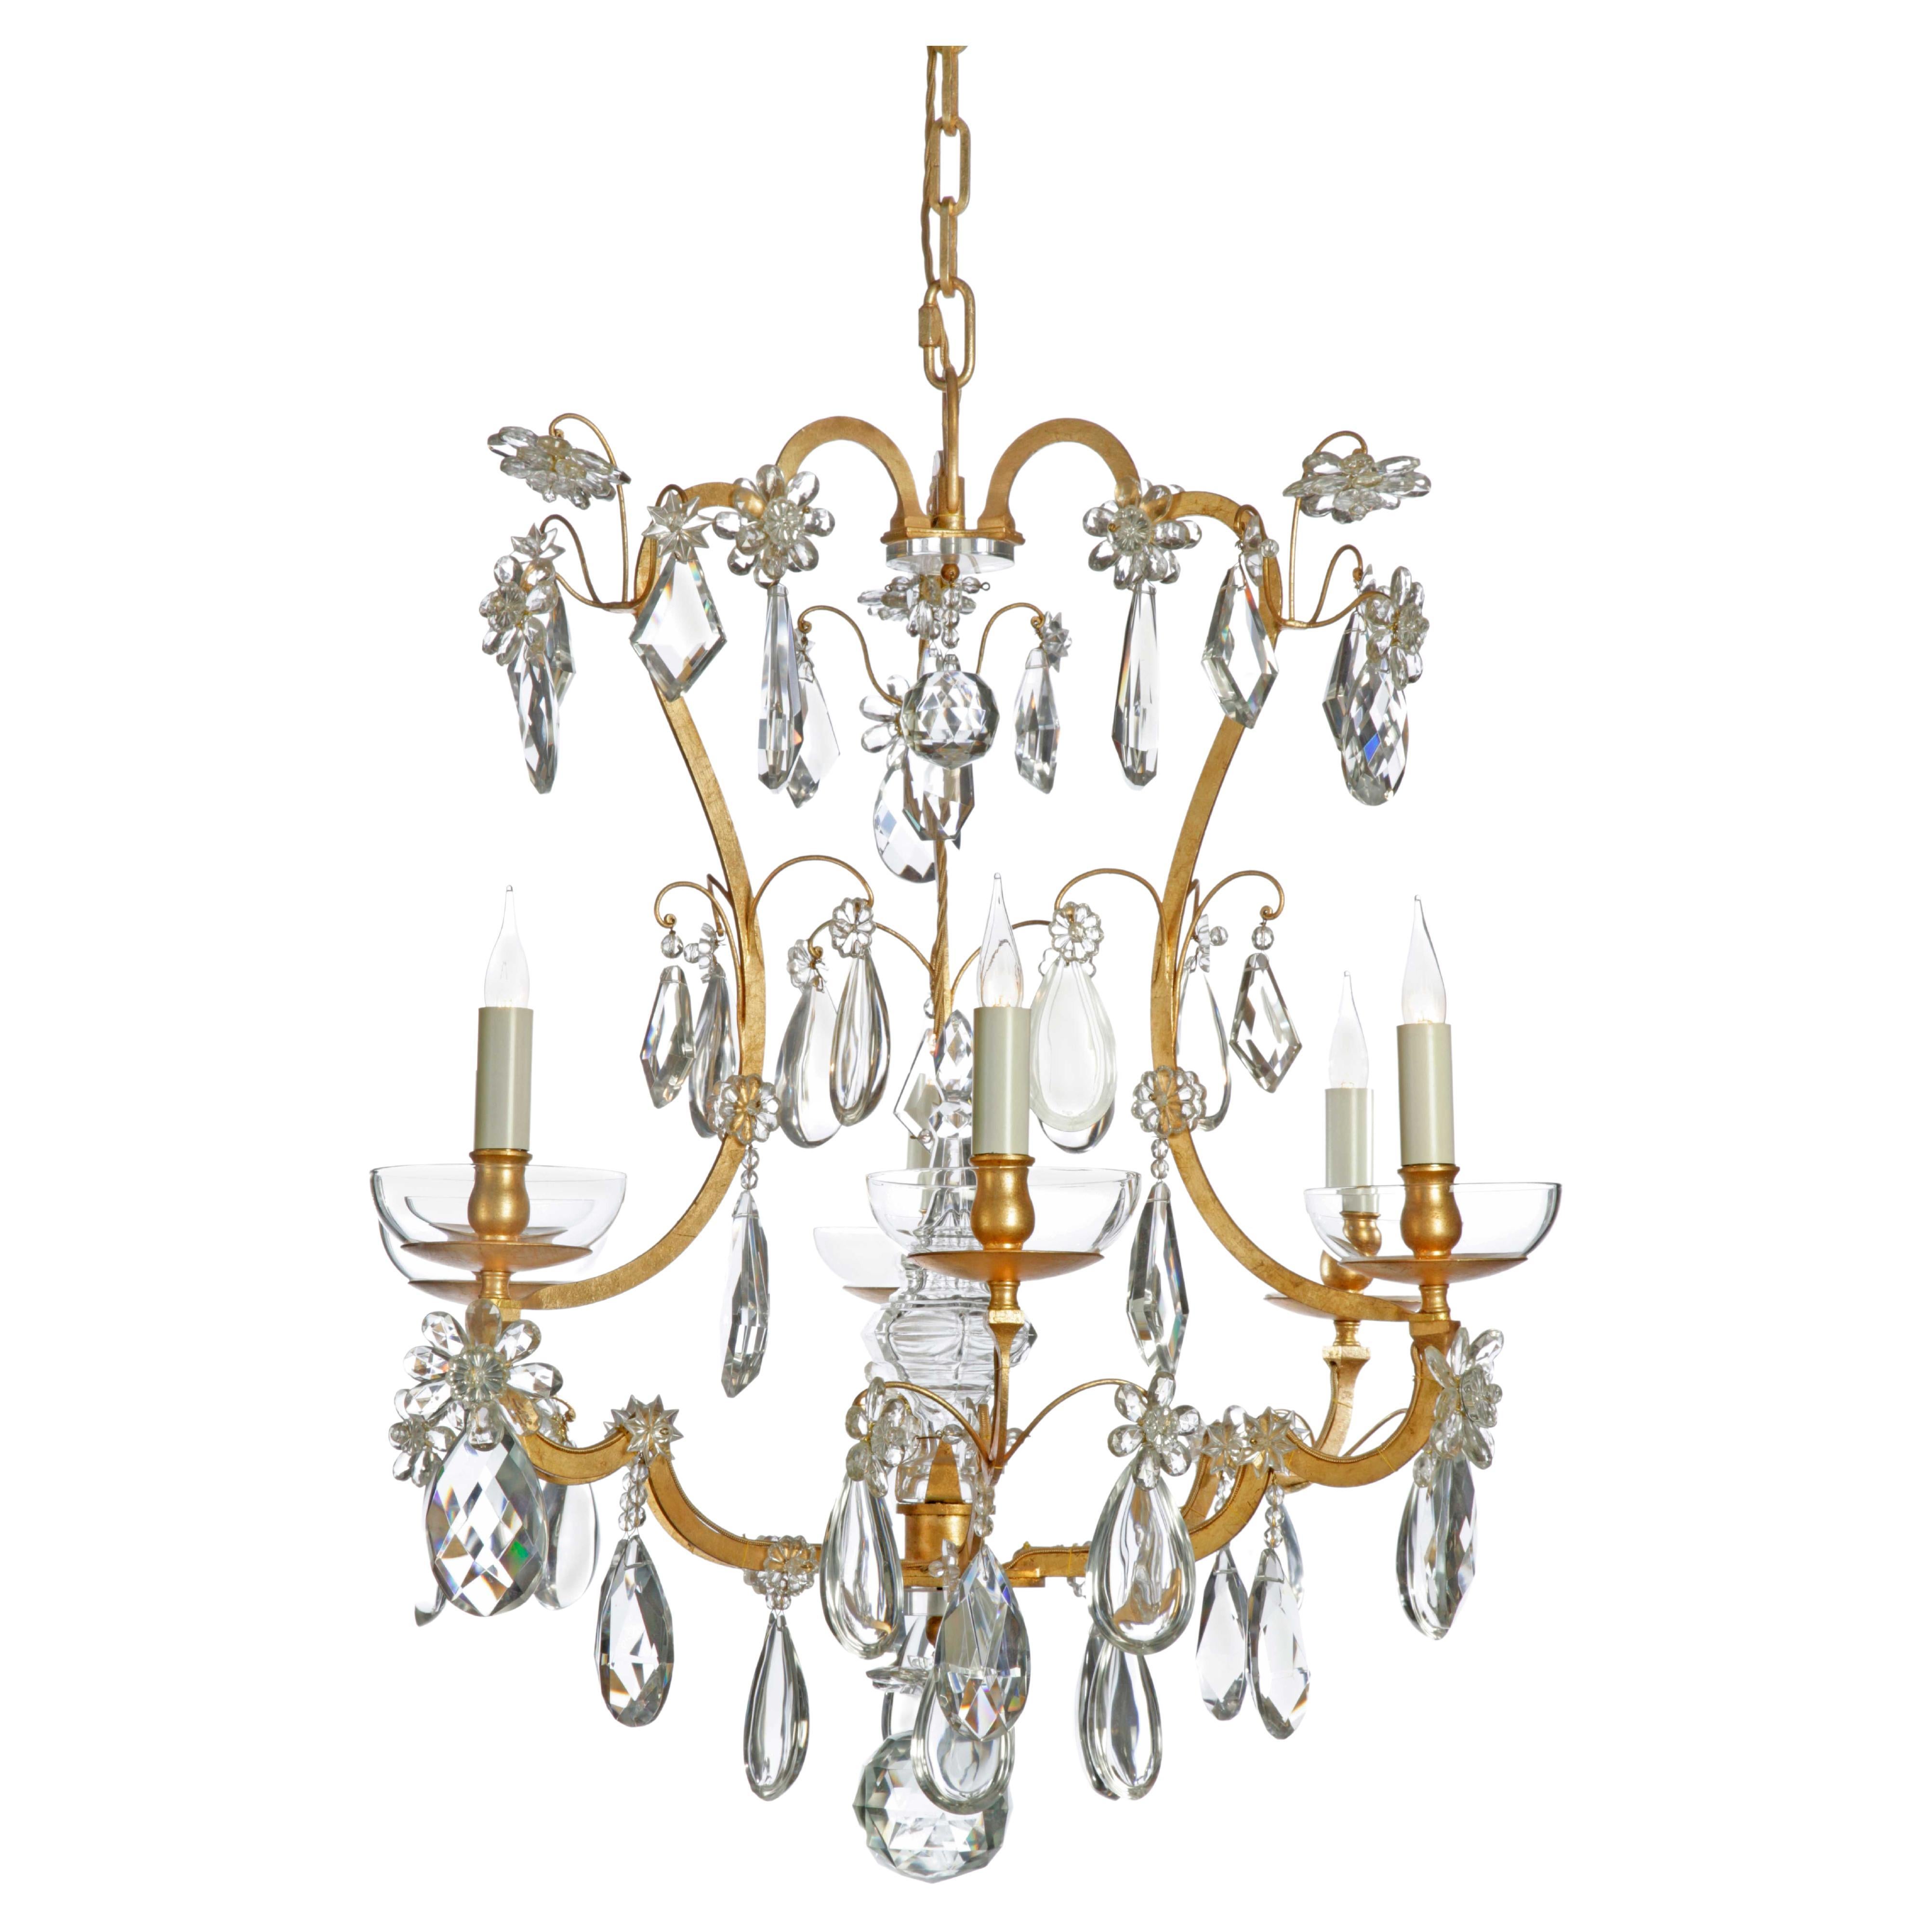 Certified Maison Bagues Chandelier, 6 Lights Iron & Crystal #17012